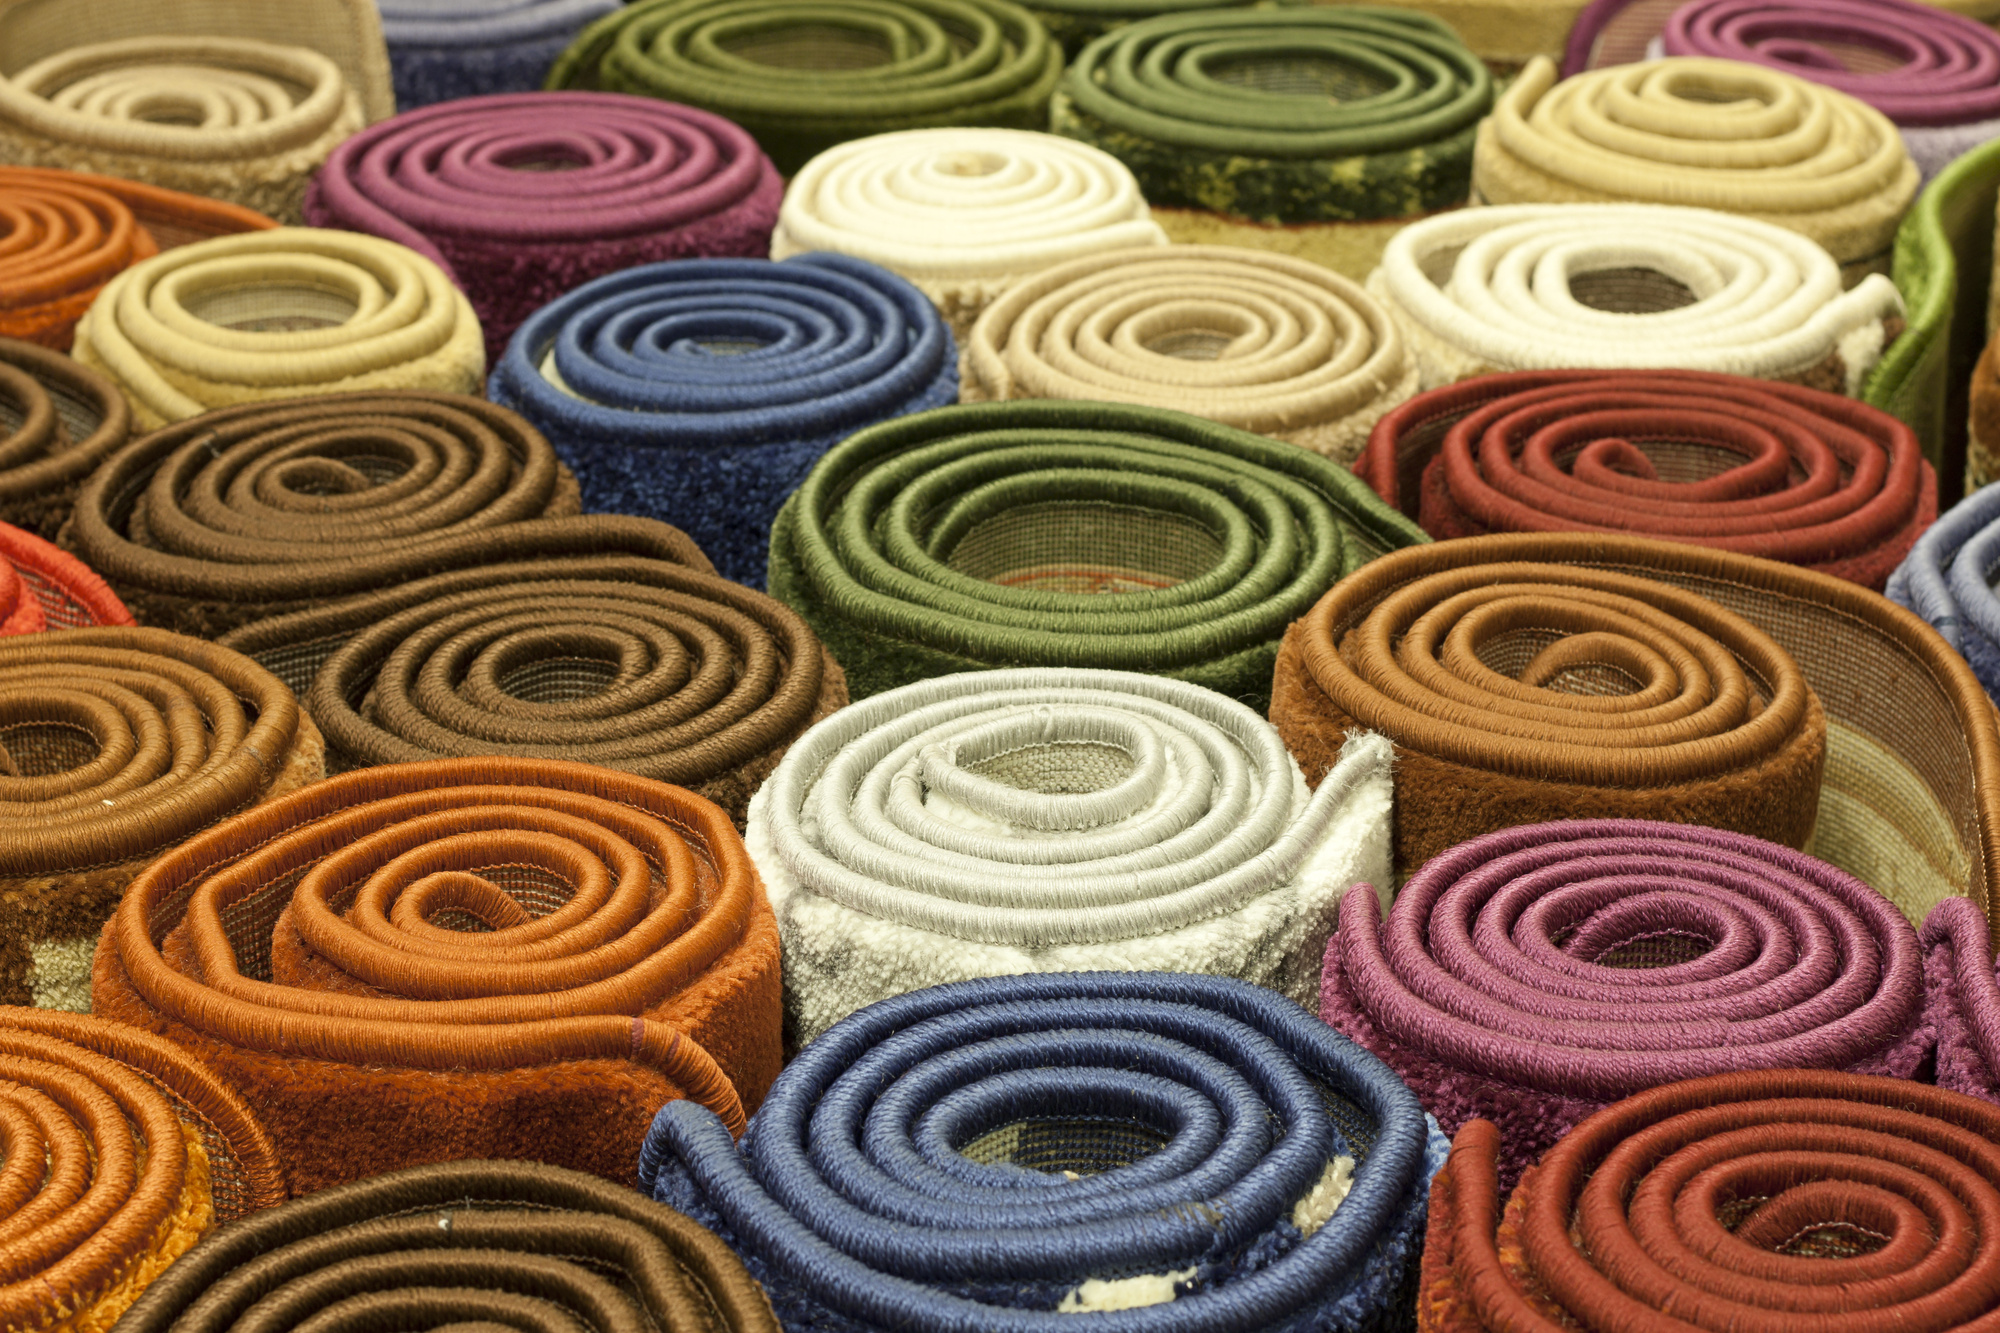 Did you know that not all carpets are created equal these days? Here are the many different types of carpets that exist today.